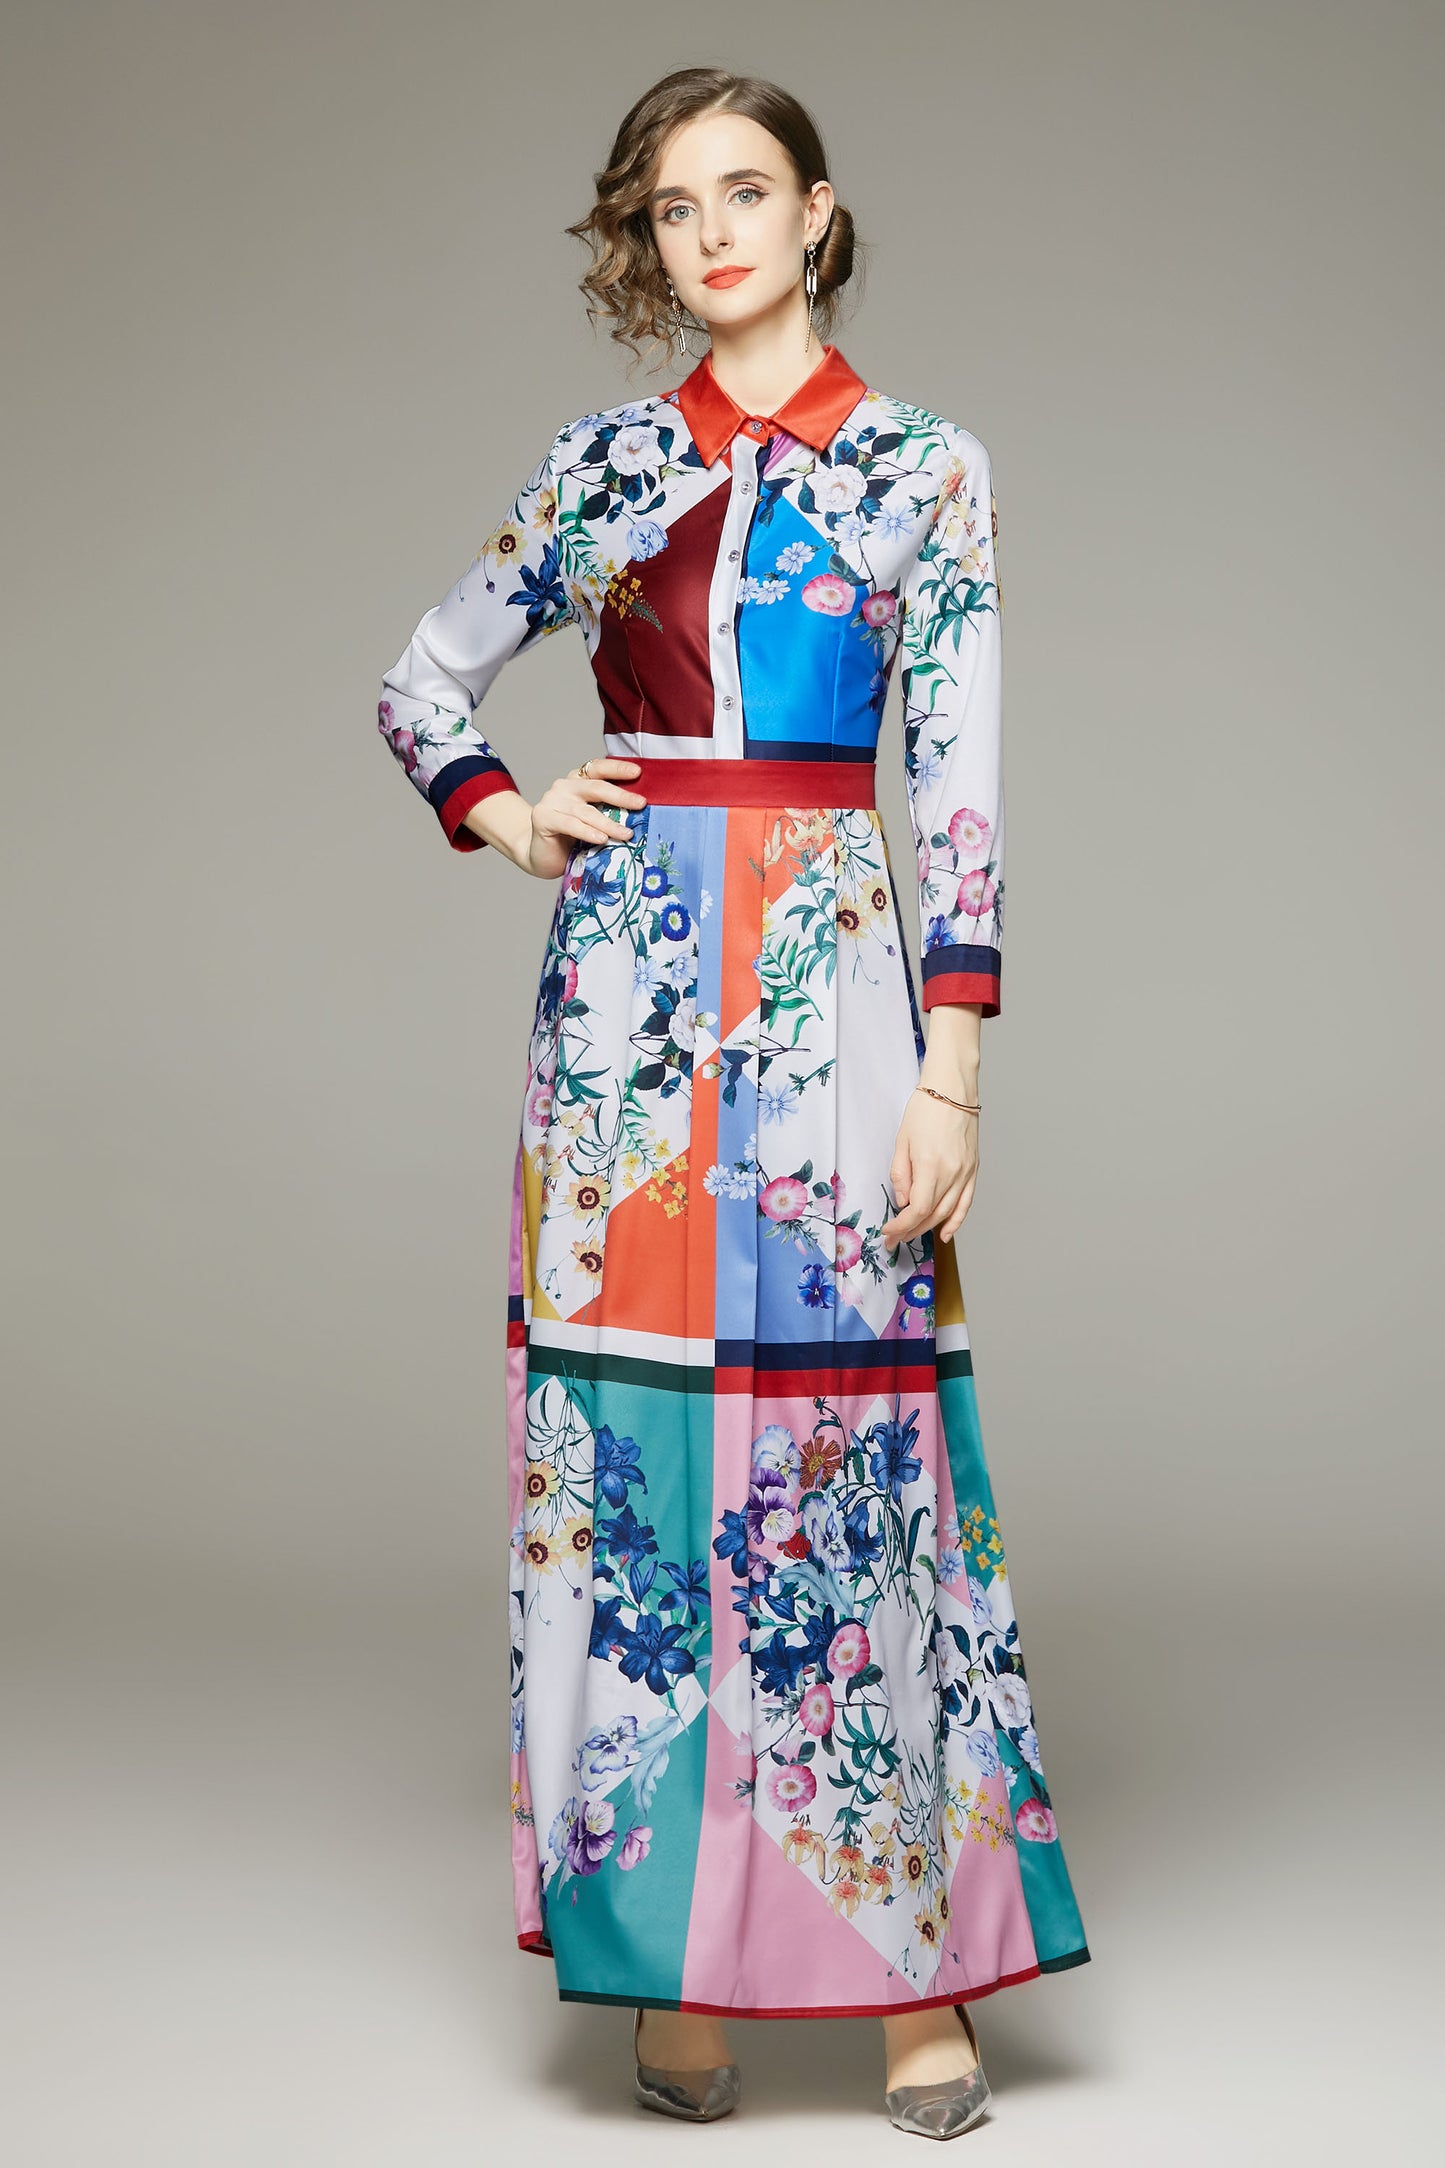 Long Sleeves Collared neckline Floral Print Maxi Dress